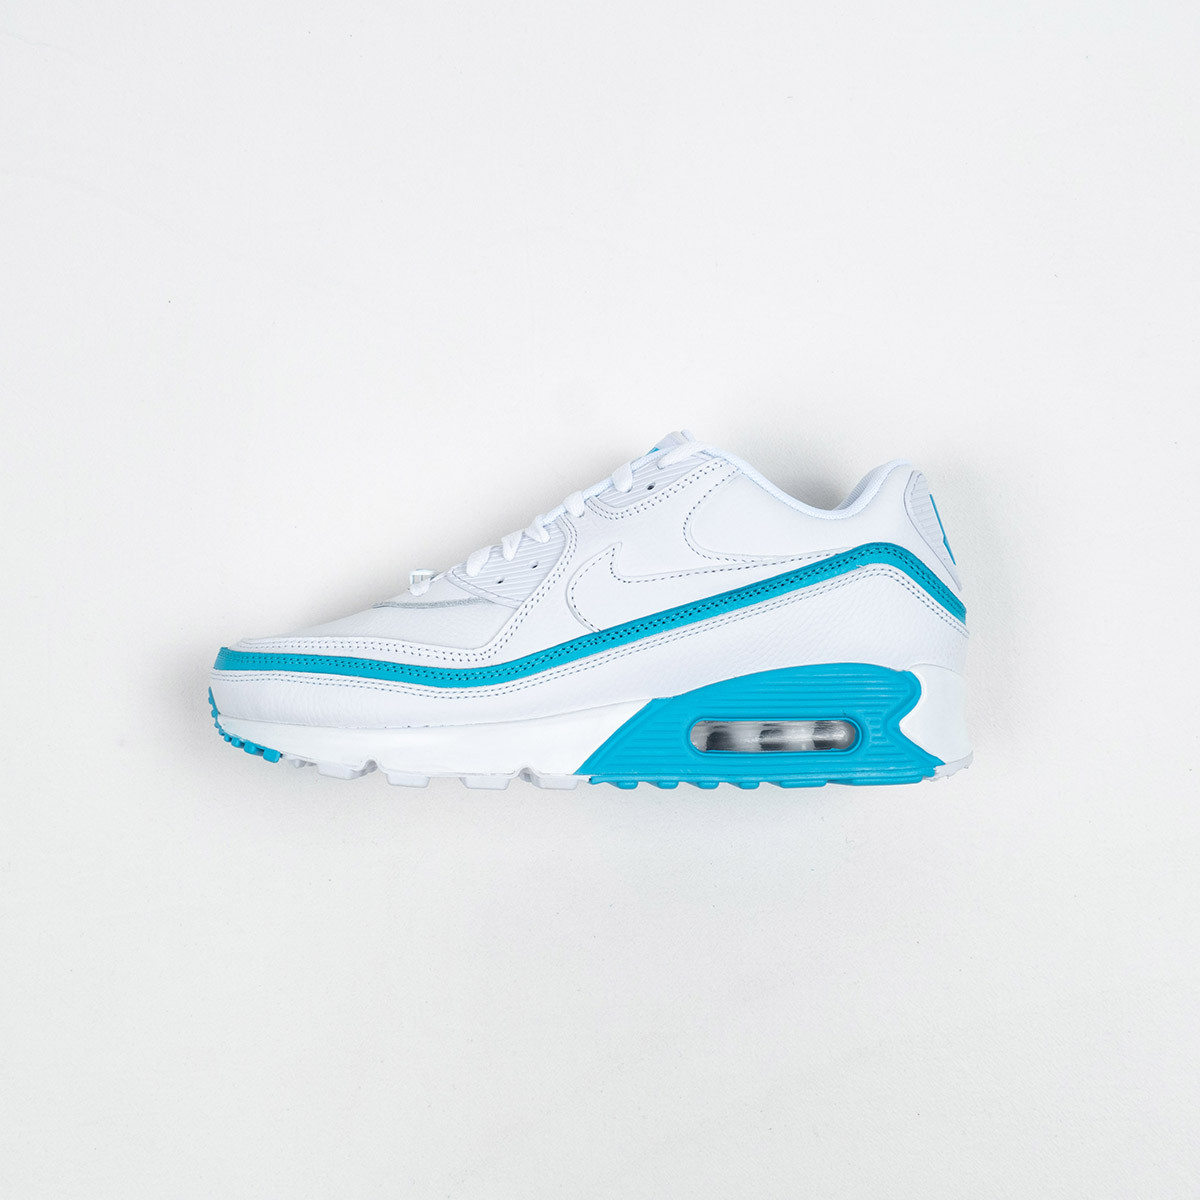 Undefeated x Nike Air Max 90 White Blue Fury For Sale